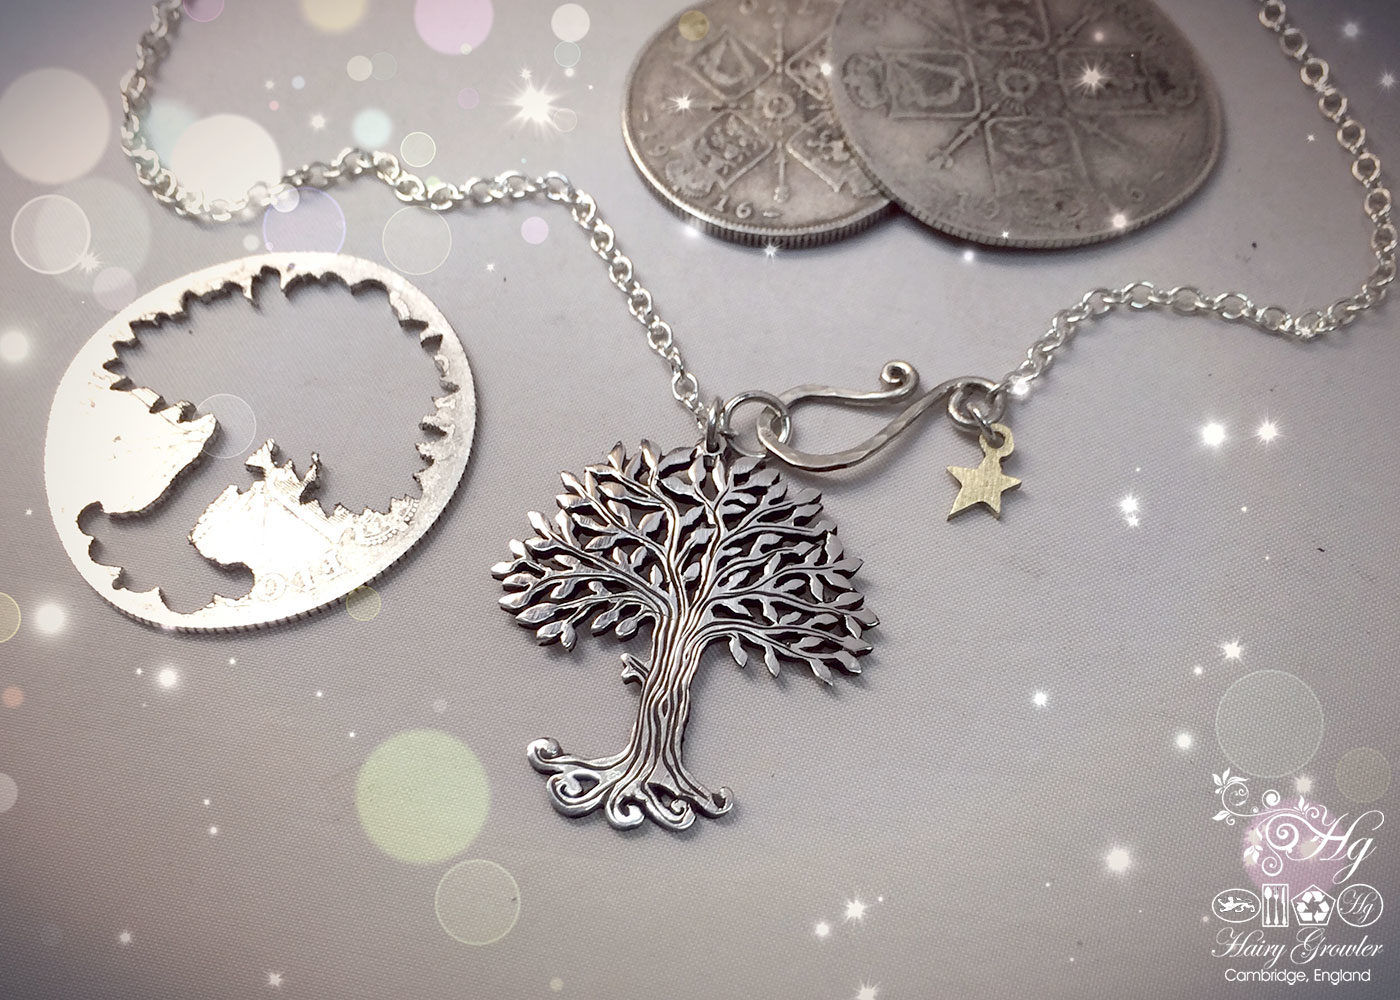 Handmade and repurposed silver Summer trees with leaves of pure silver made from a silver coin